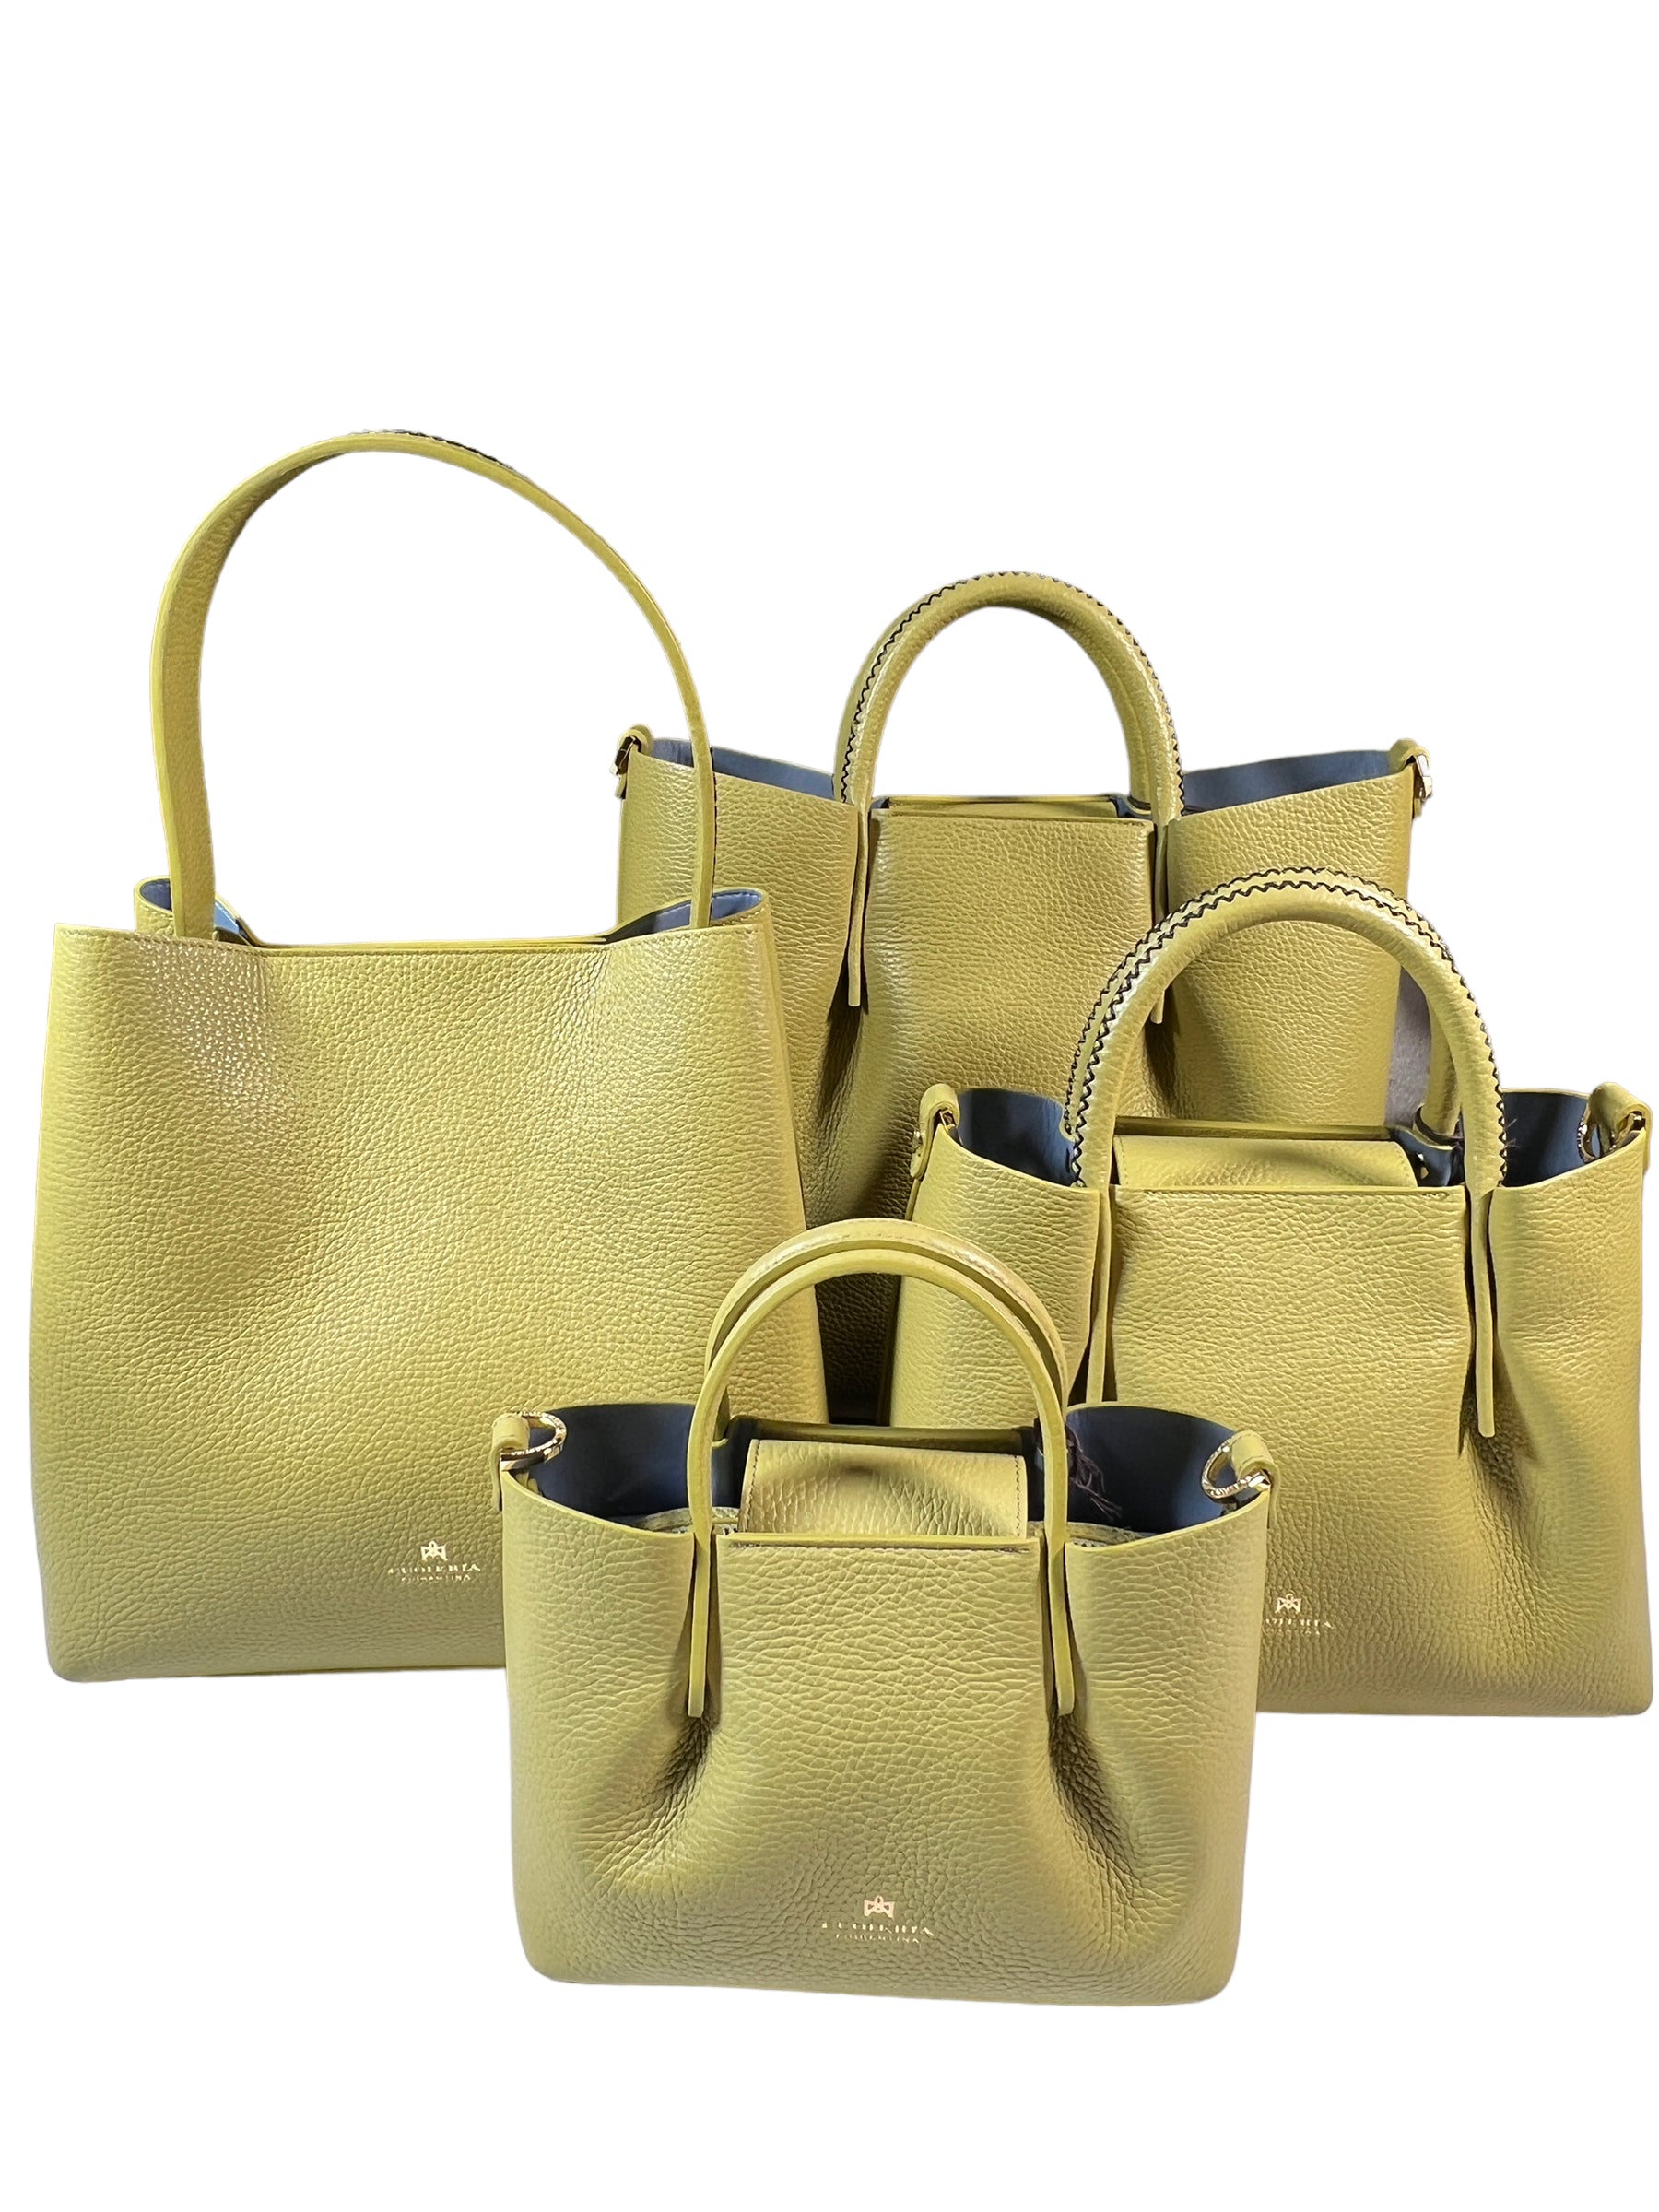 CUOIERIA FIORENTINA CANDY LARGE TOTE - LIME